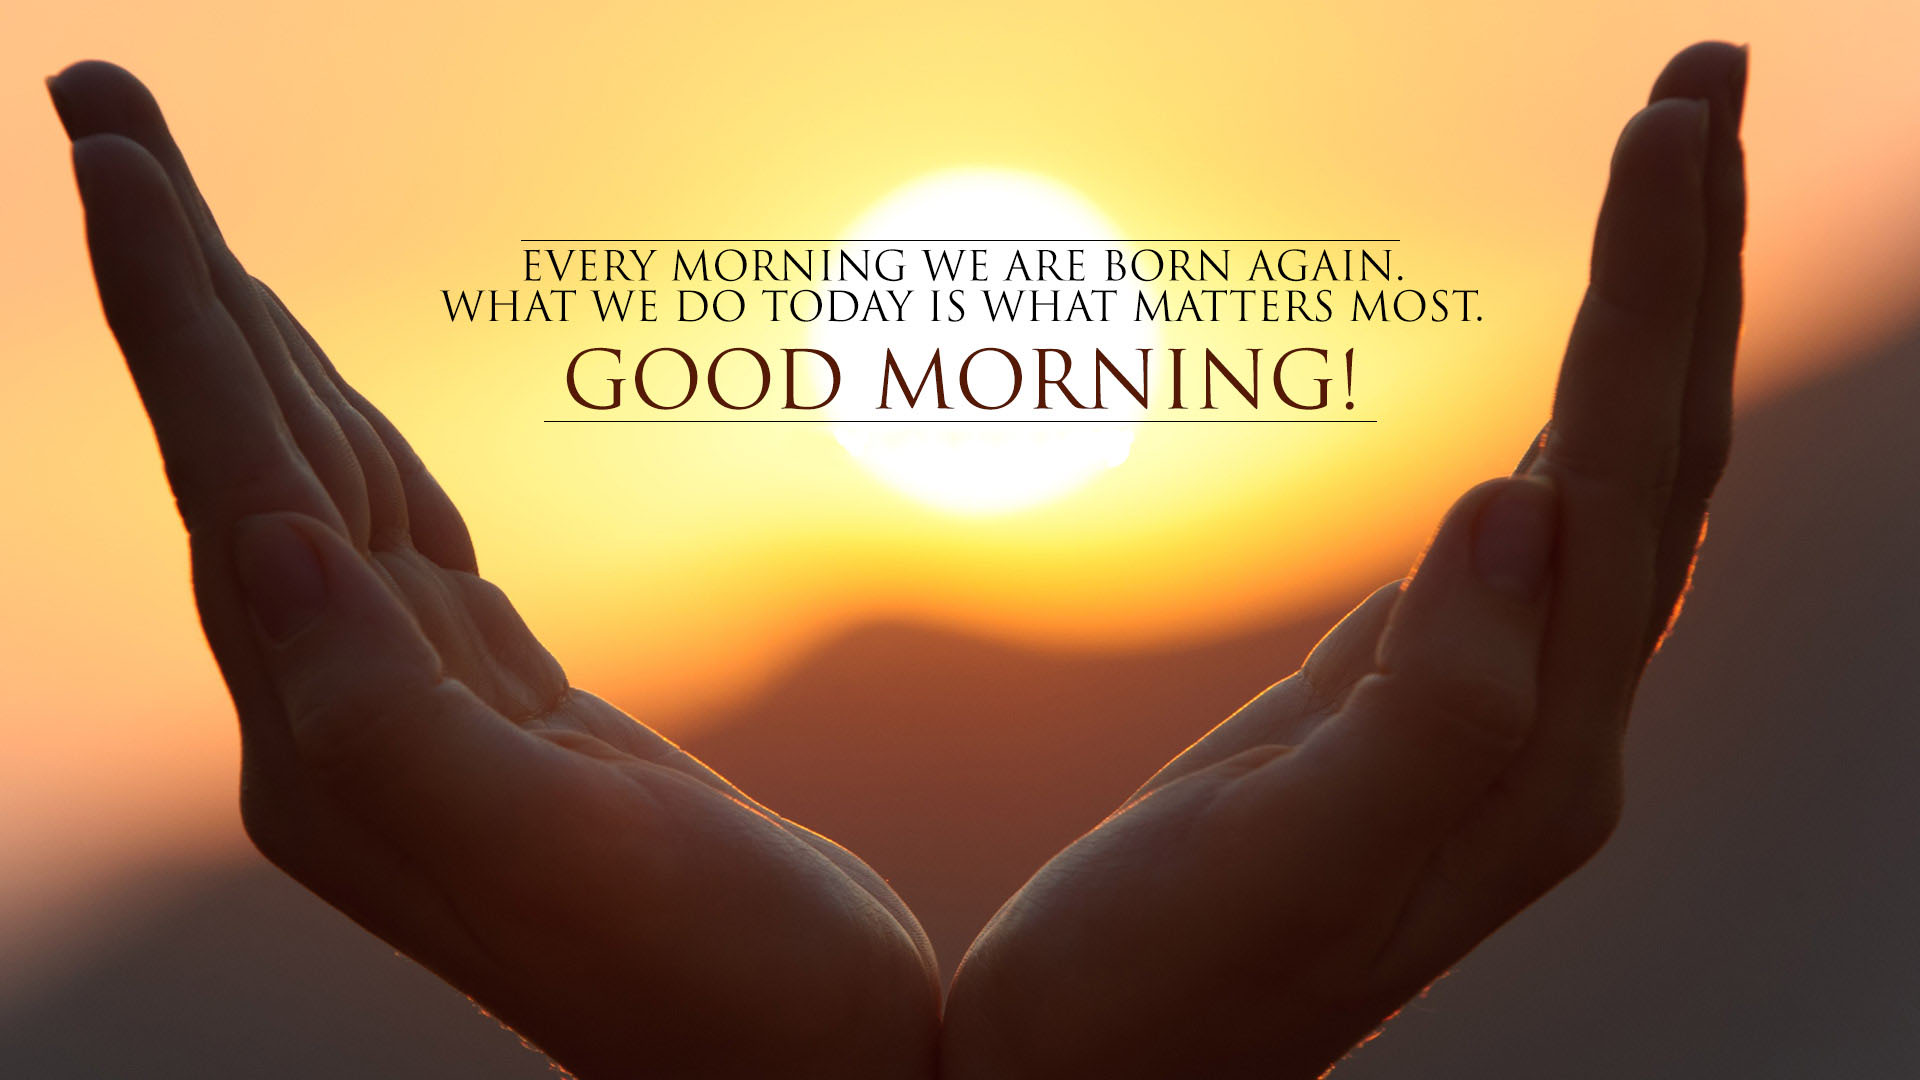 Every morning we are born again what we do today is what matters most good morning